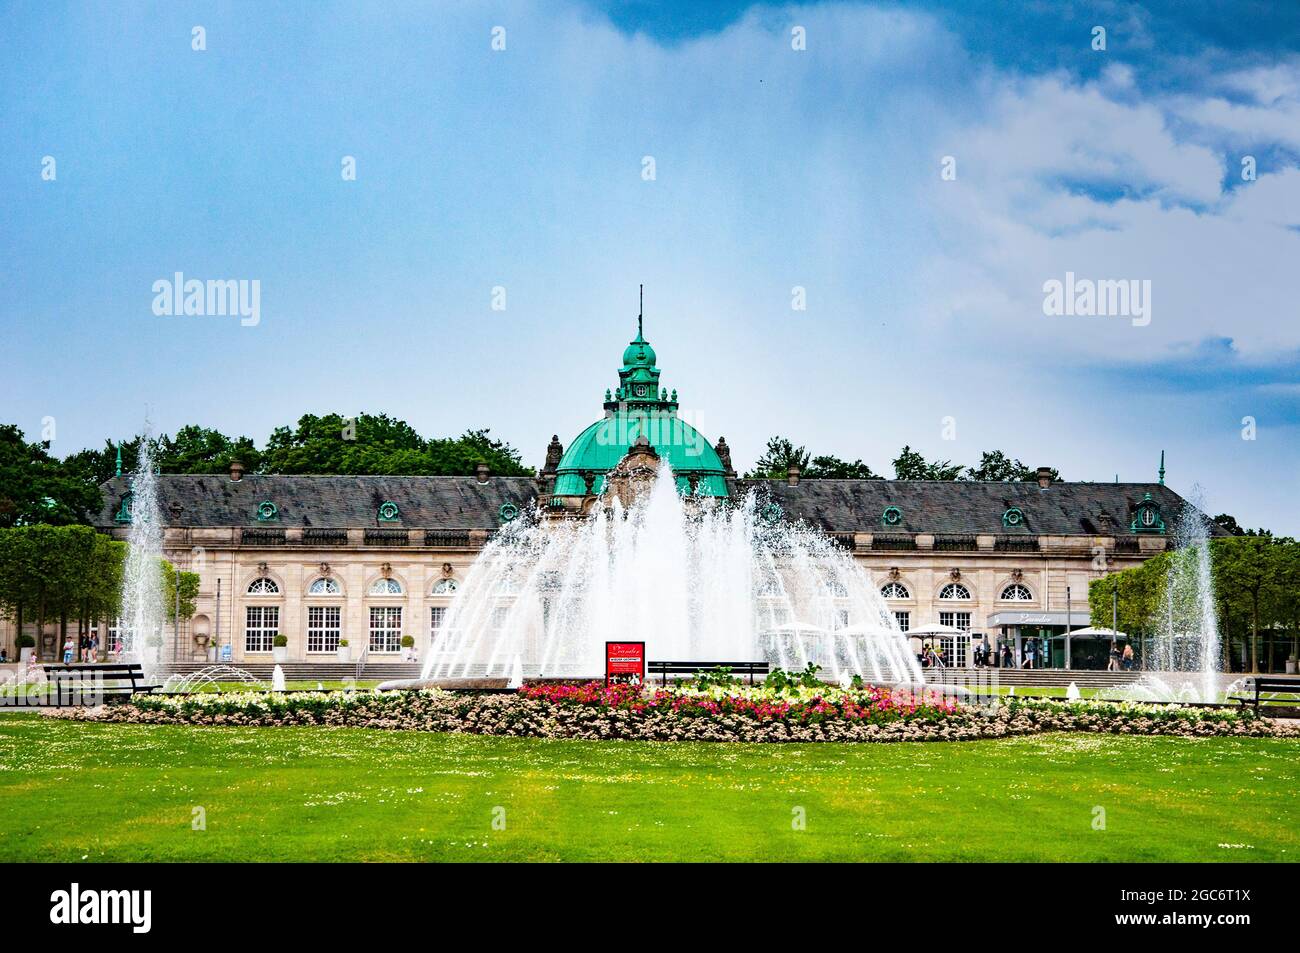 BAD OEYNHAUSEN, GERMANY. JUNE 03, 2021. Kurpark Bad Oeynhausen. Beautiful architecture in traditional style, large fountain in front of the building. Stock Photo